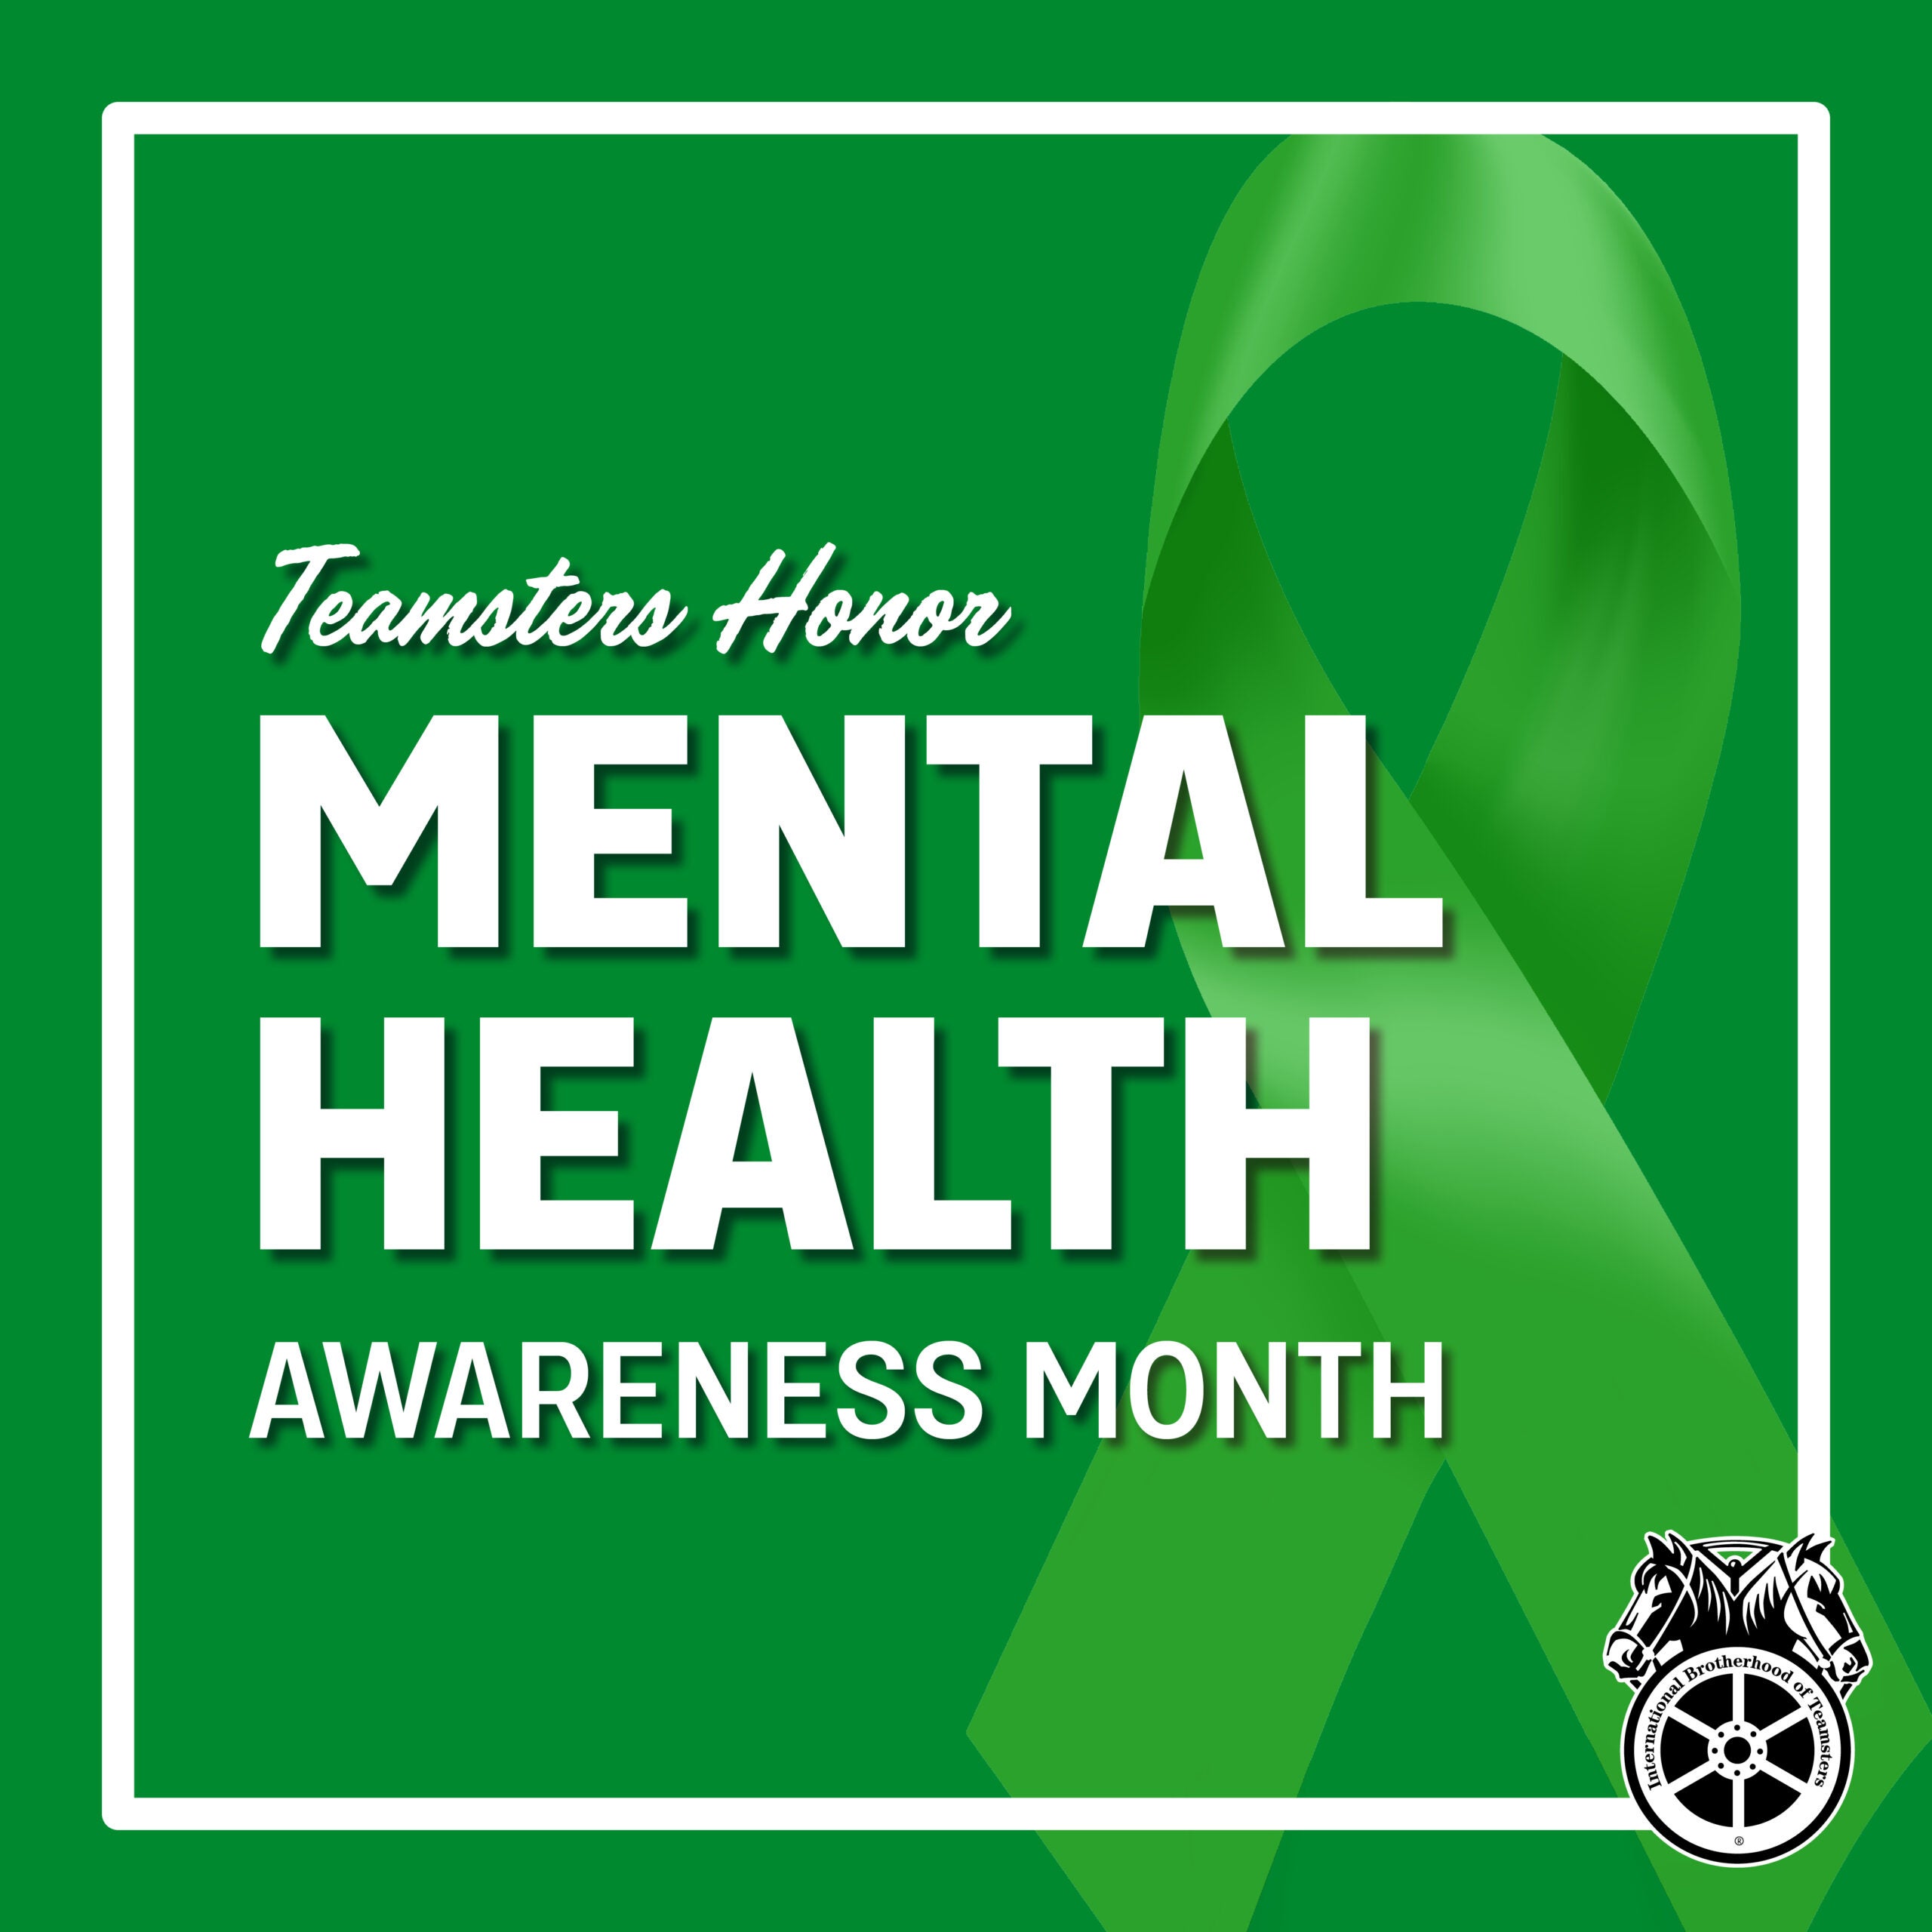 Teamsters Recognize Mental Health Awareness Month